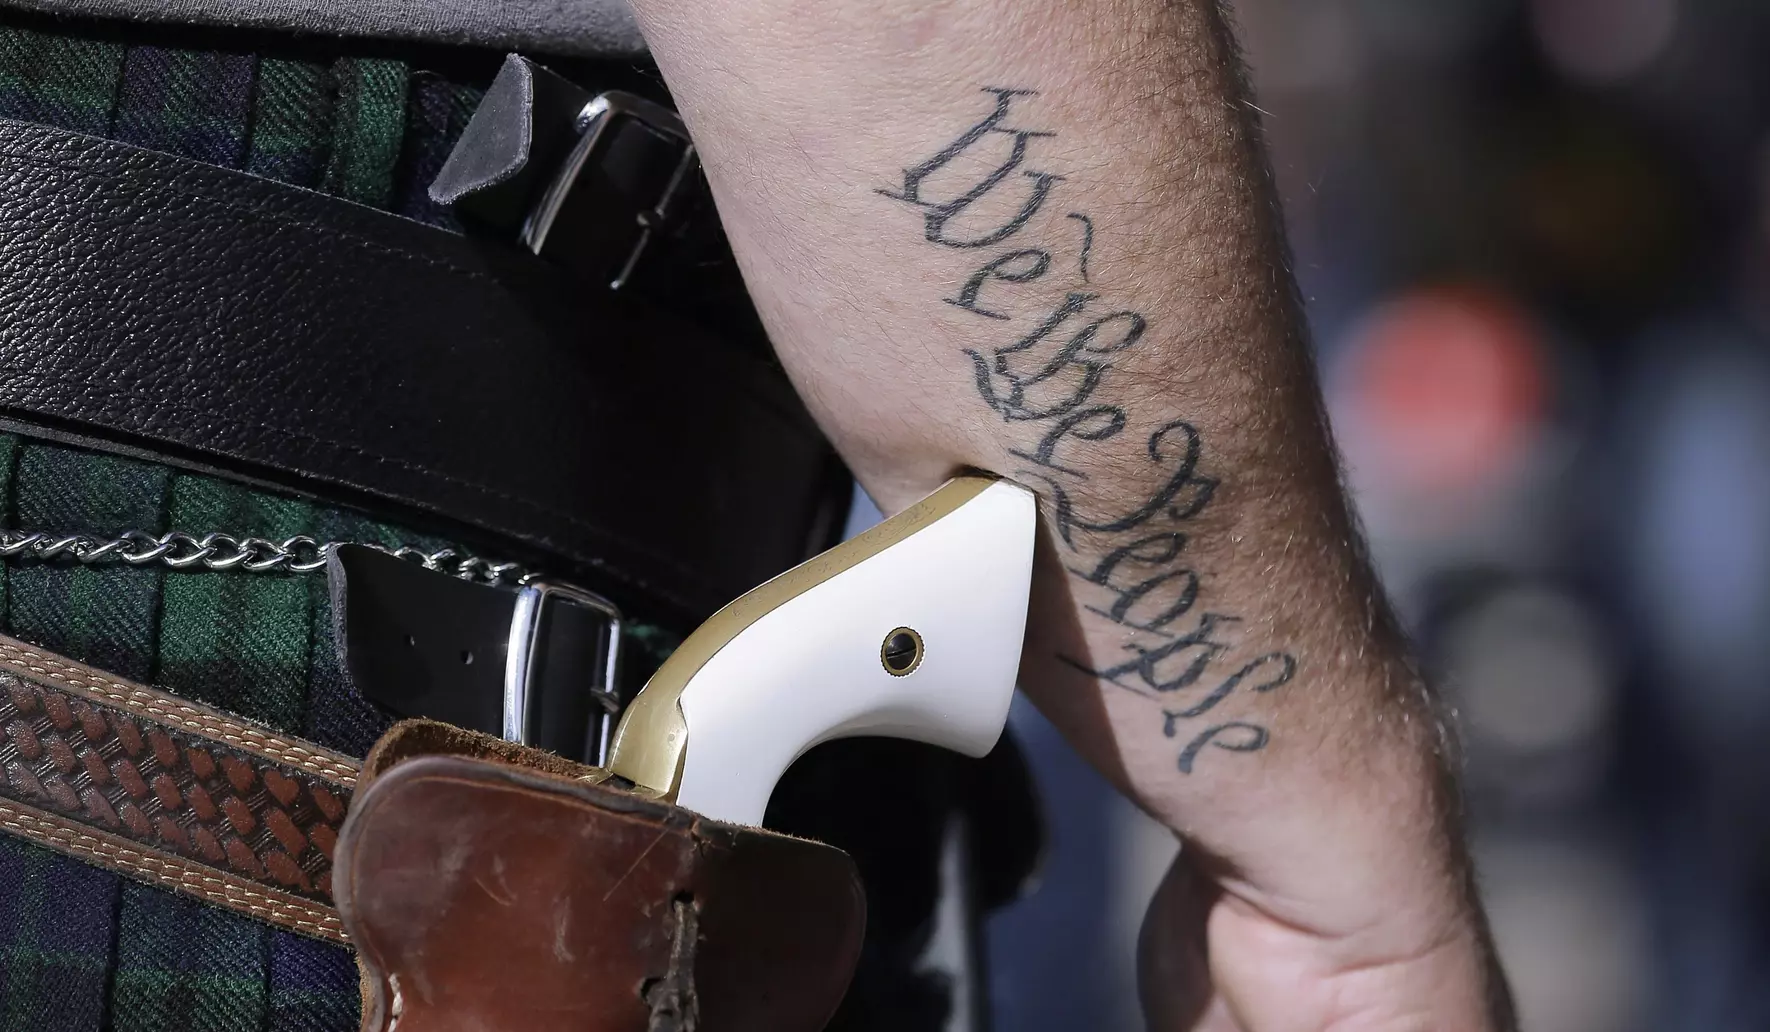 A federal judge has issued a ruling preventing the enforcement of a California statute that prohibits the possession of firearms in the majority of public spaces.